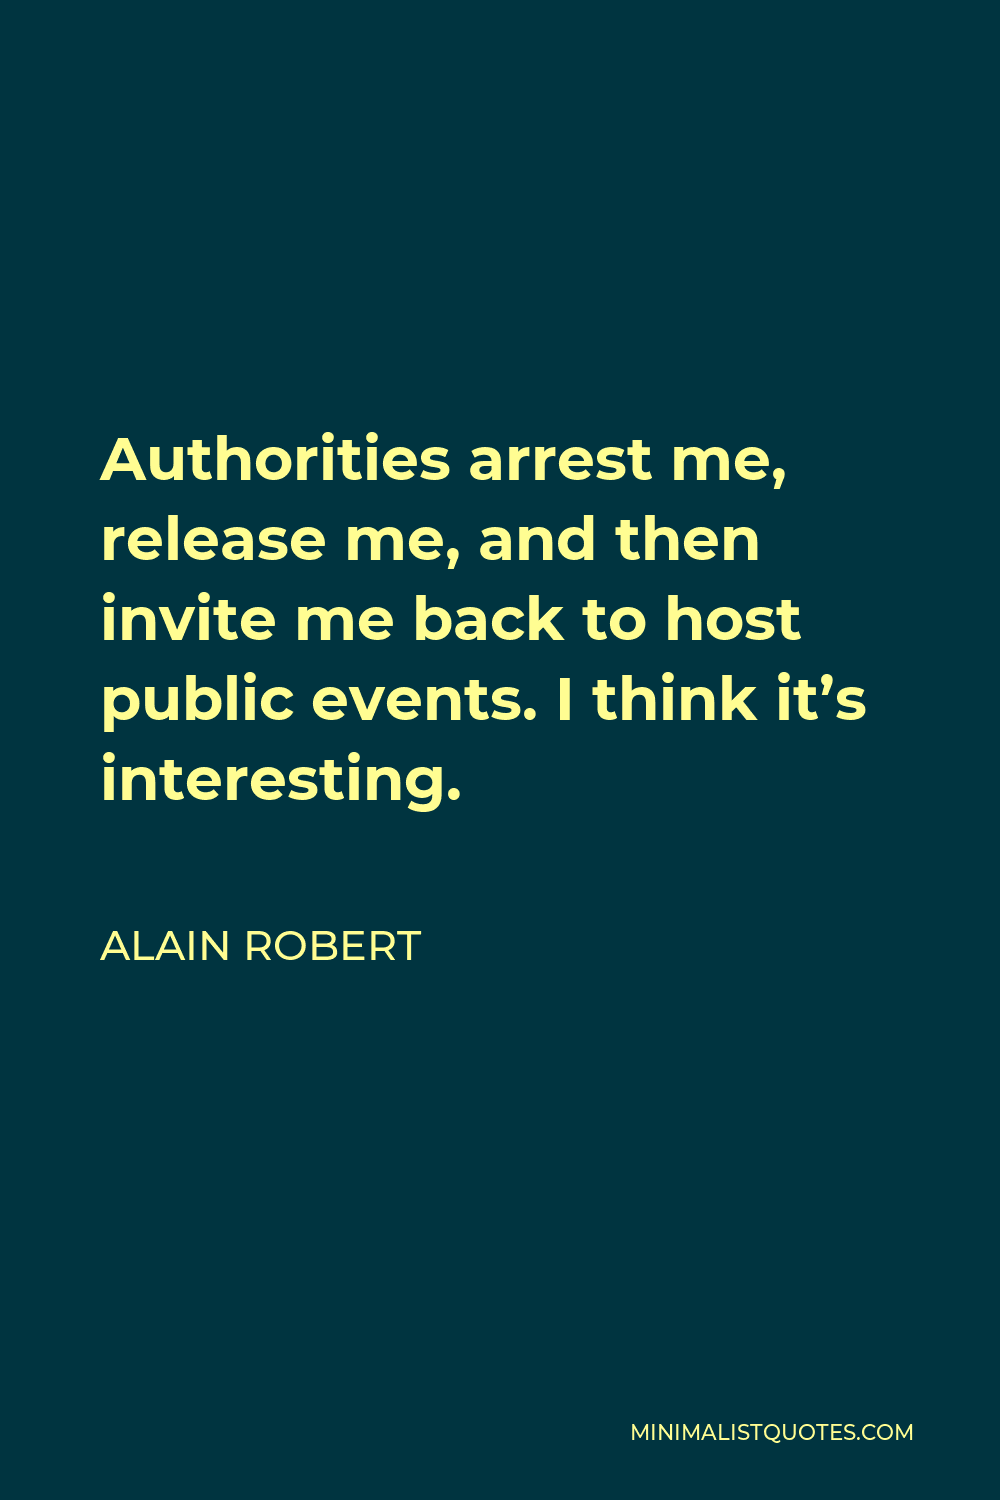 Alain Robert Quote - Authorities arrest me, release me, and then invite me back to host public events. I think it’s interesting.